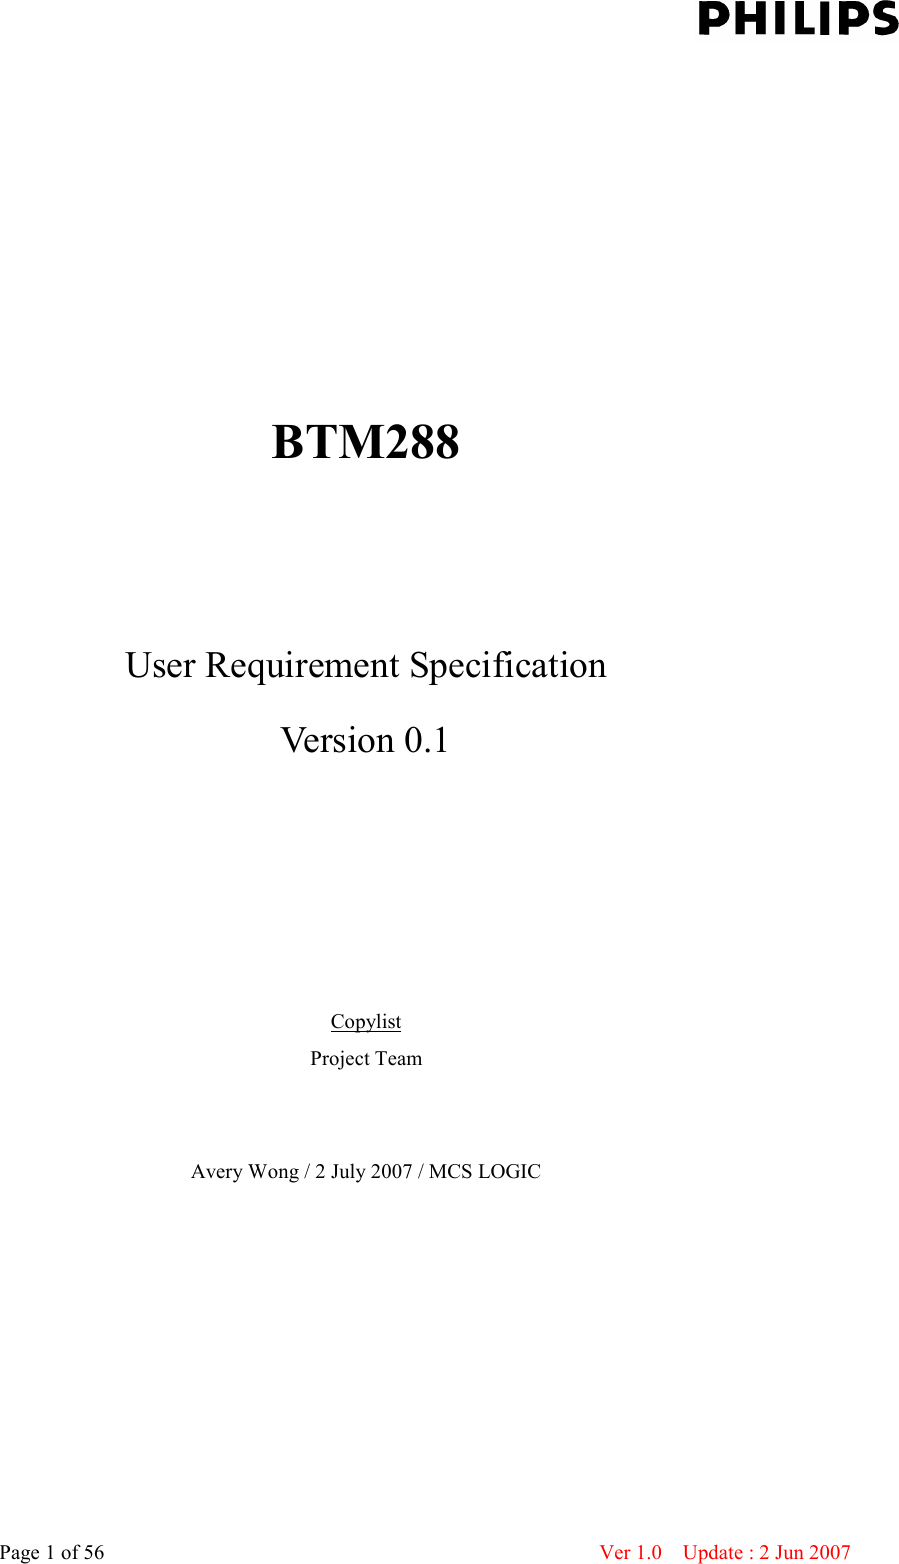    Page 1 of 56                      Ver 1.0    Update : 2 Jun 2007       BTM288     User Requirement Specification Version 0.1     Copylist Project Team   Avery Wong / 2 July 2007 / MCS LOGIC 